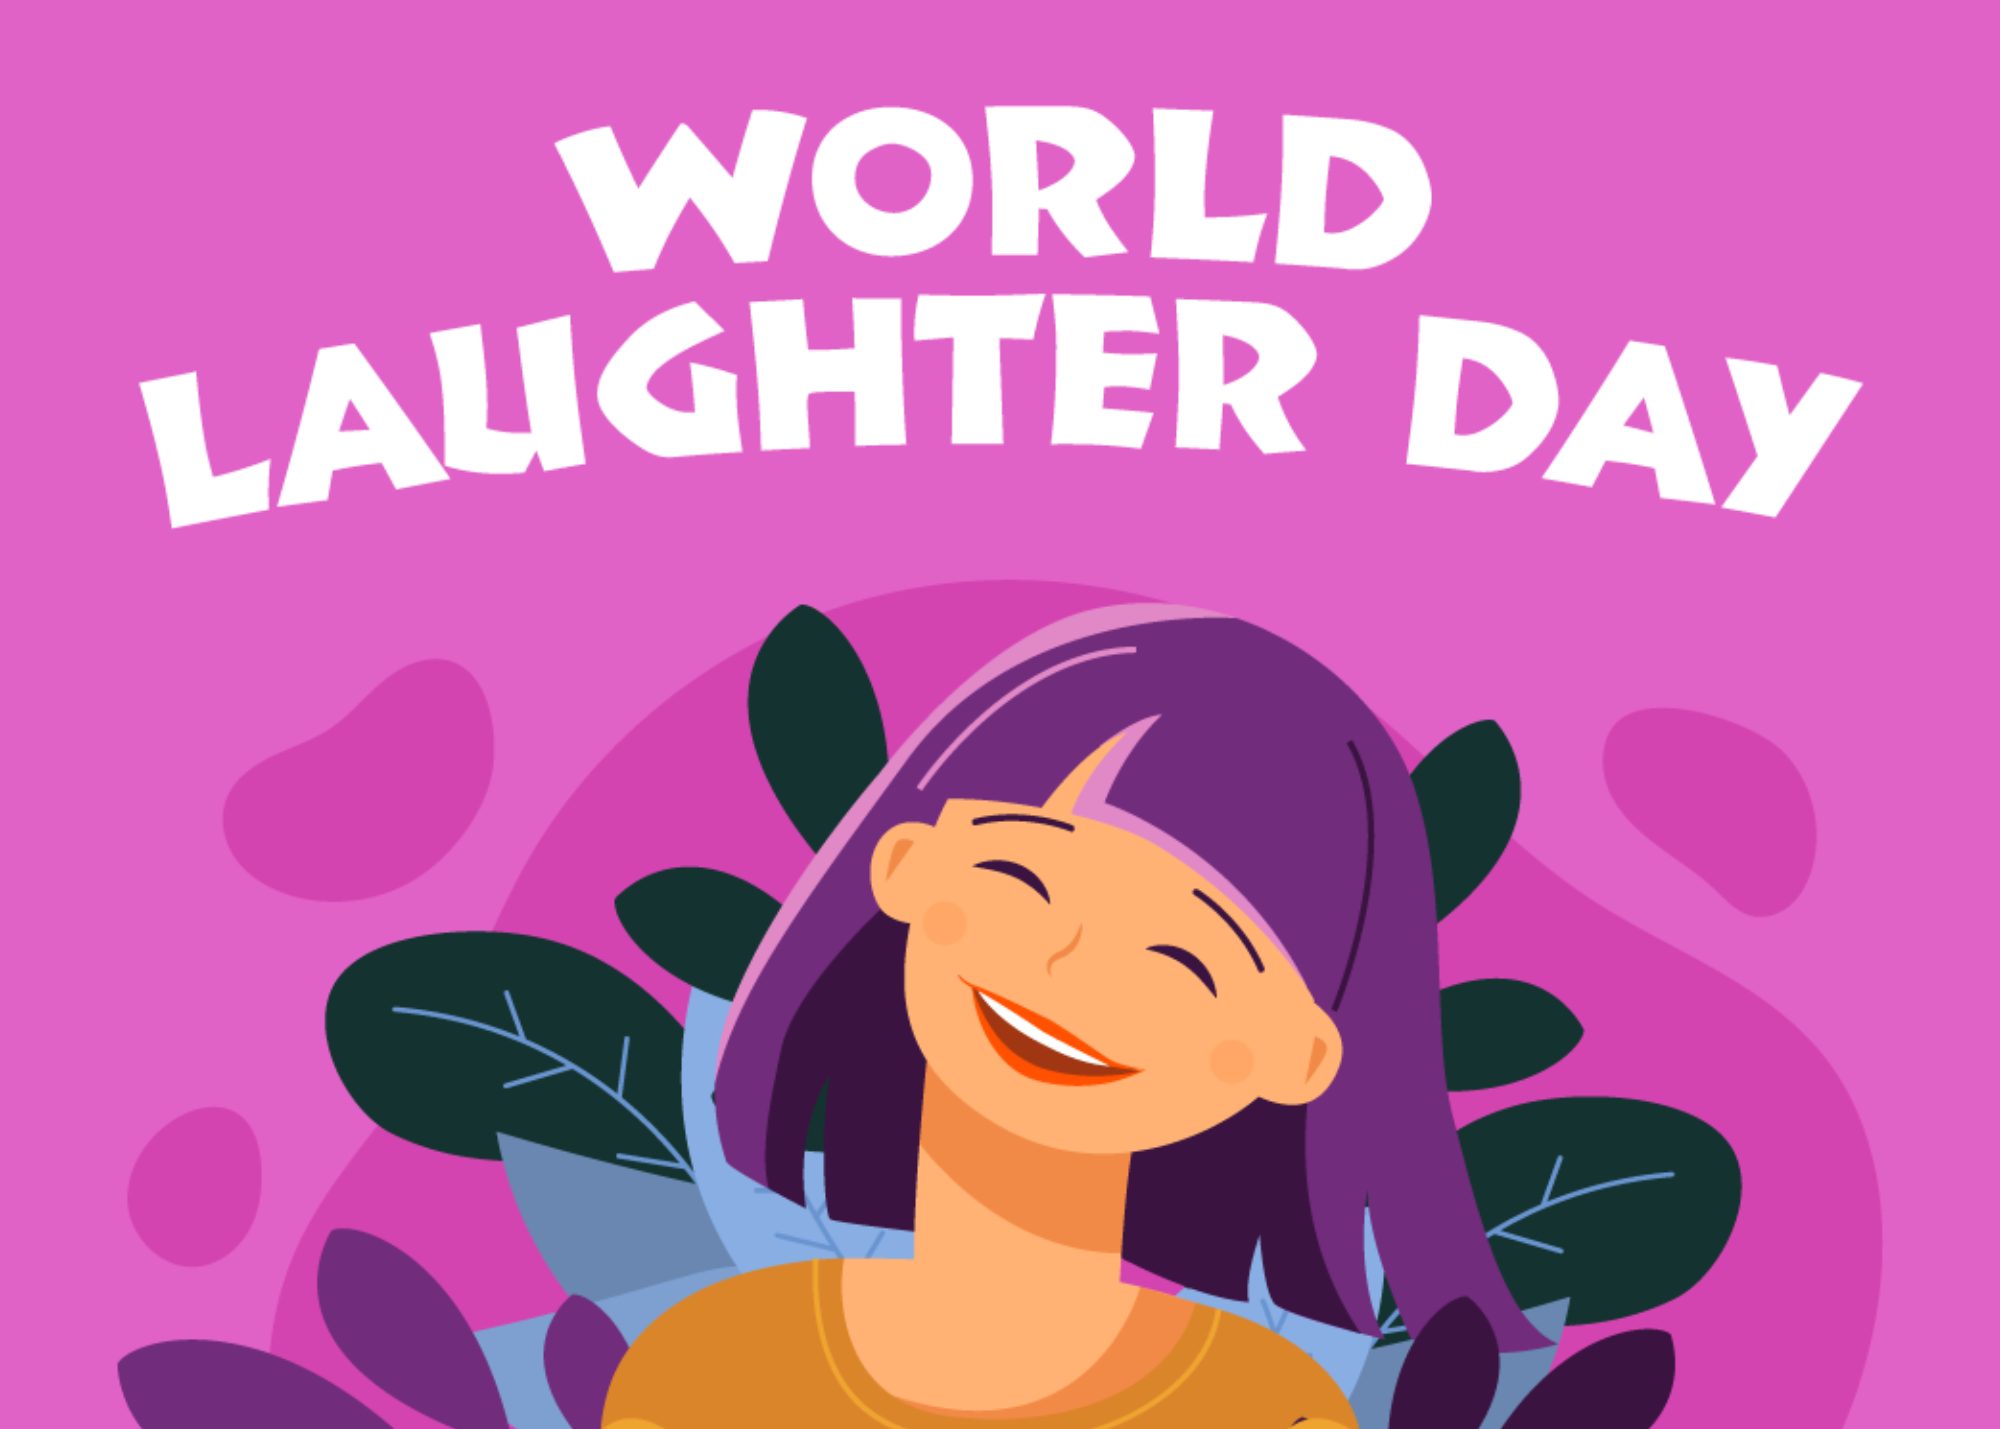 Shrill or funny, giggly or bubbly, on this day, let out your laughter and laugh to your heart’s content.